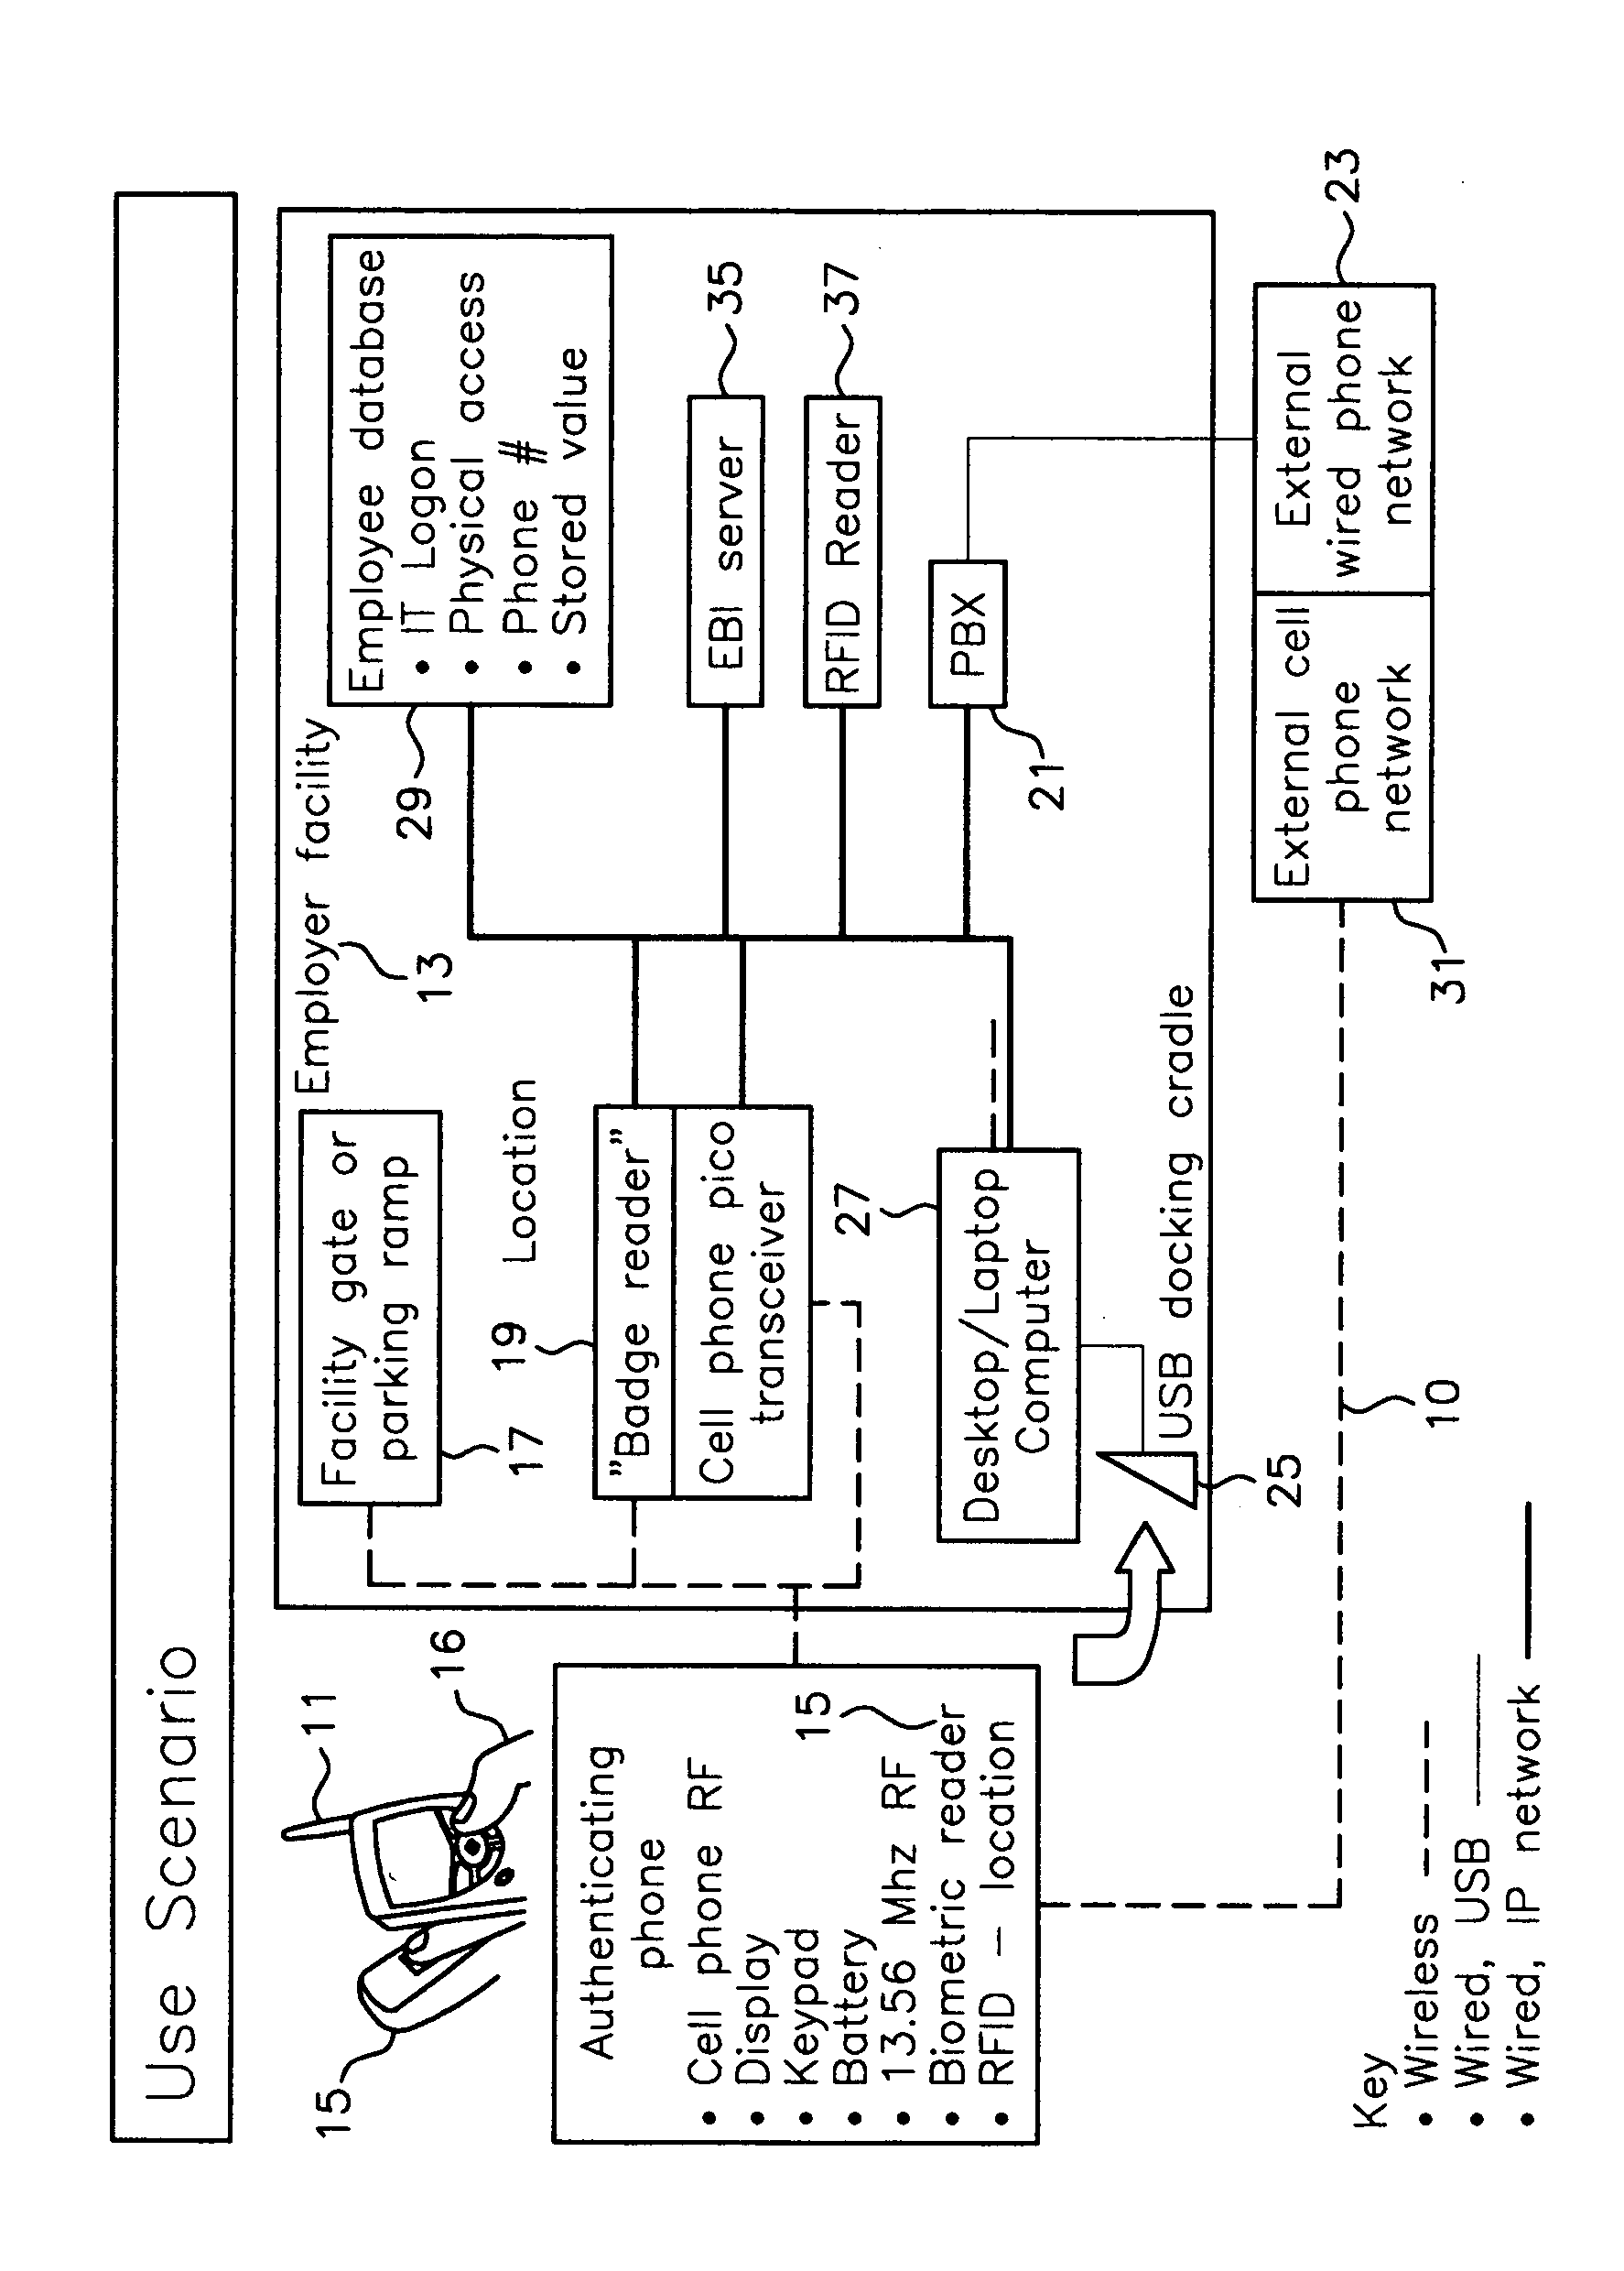 Authenticating wireless phone system